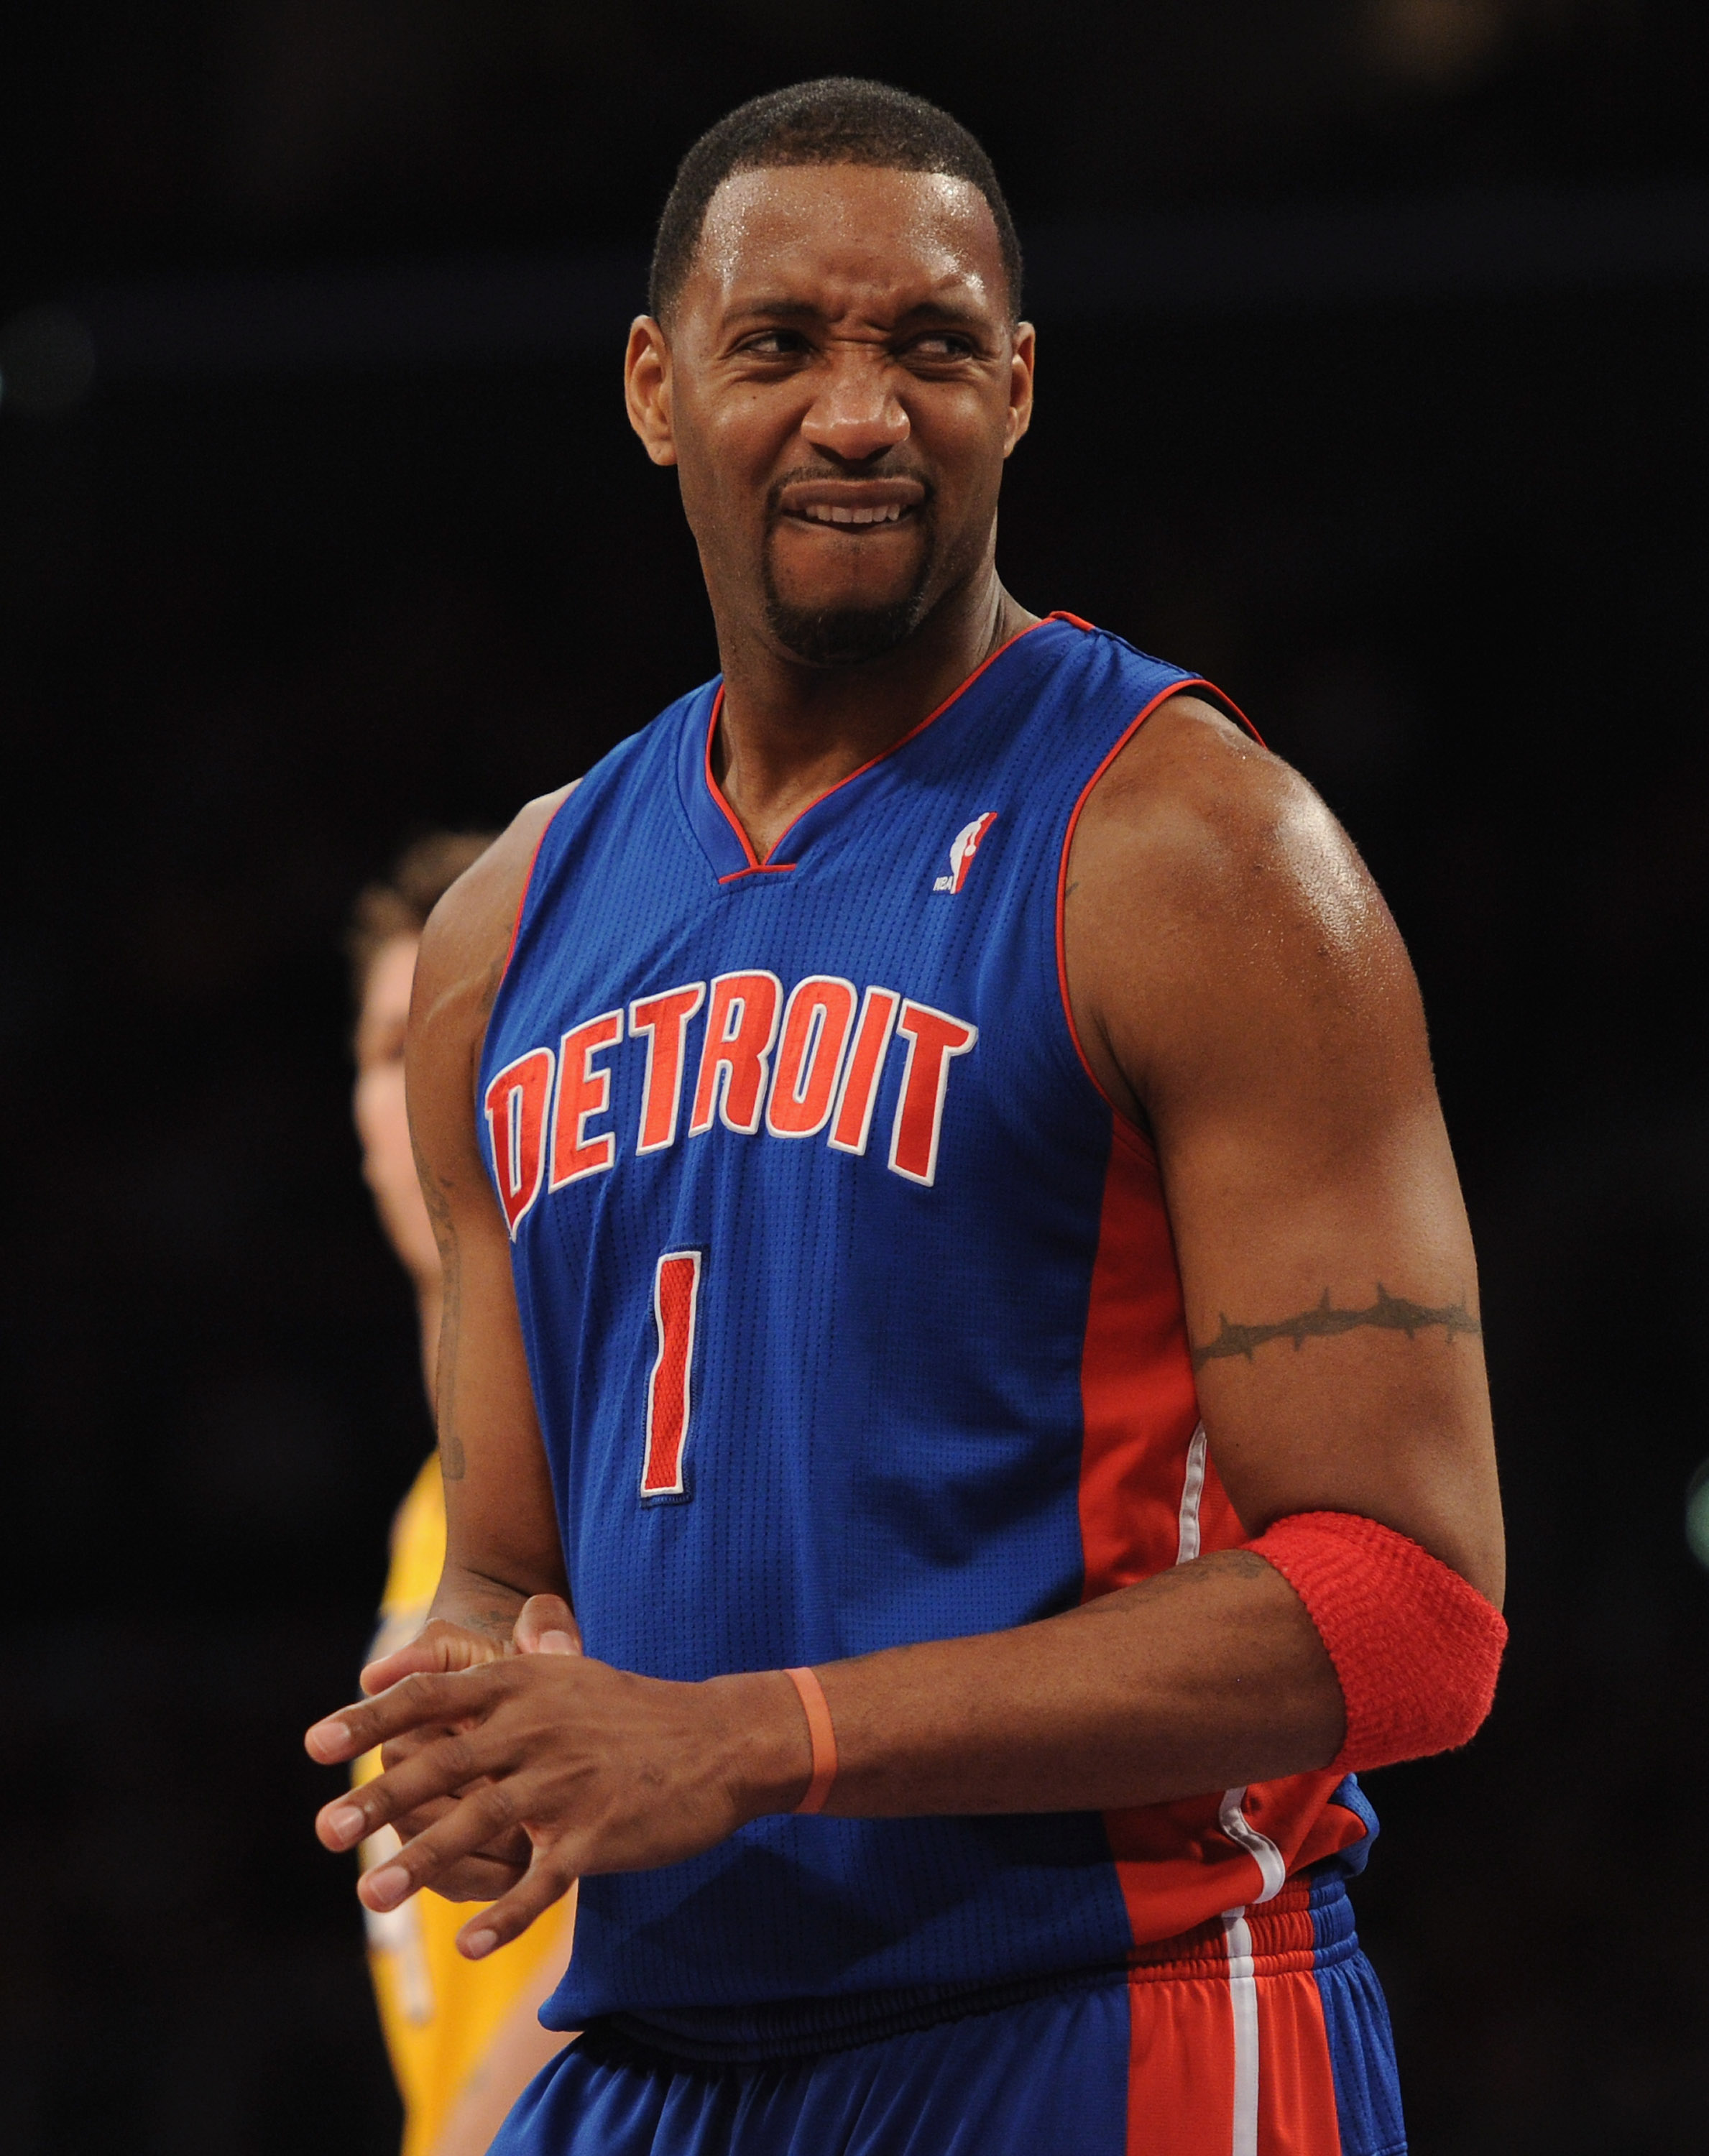 LOS ANGELES, CA - JANUARY 04:  Tracy McGrady #1 of the Detroit Pistons grimaces after a foul against the Los Angeles Lakers at the Staples Center on January 4, 2011 in Los Angeles, California. NOTE TO USER: User expressly acknowledges and agrees that, by